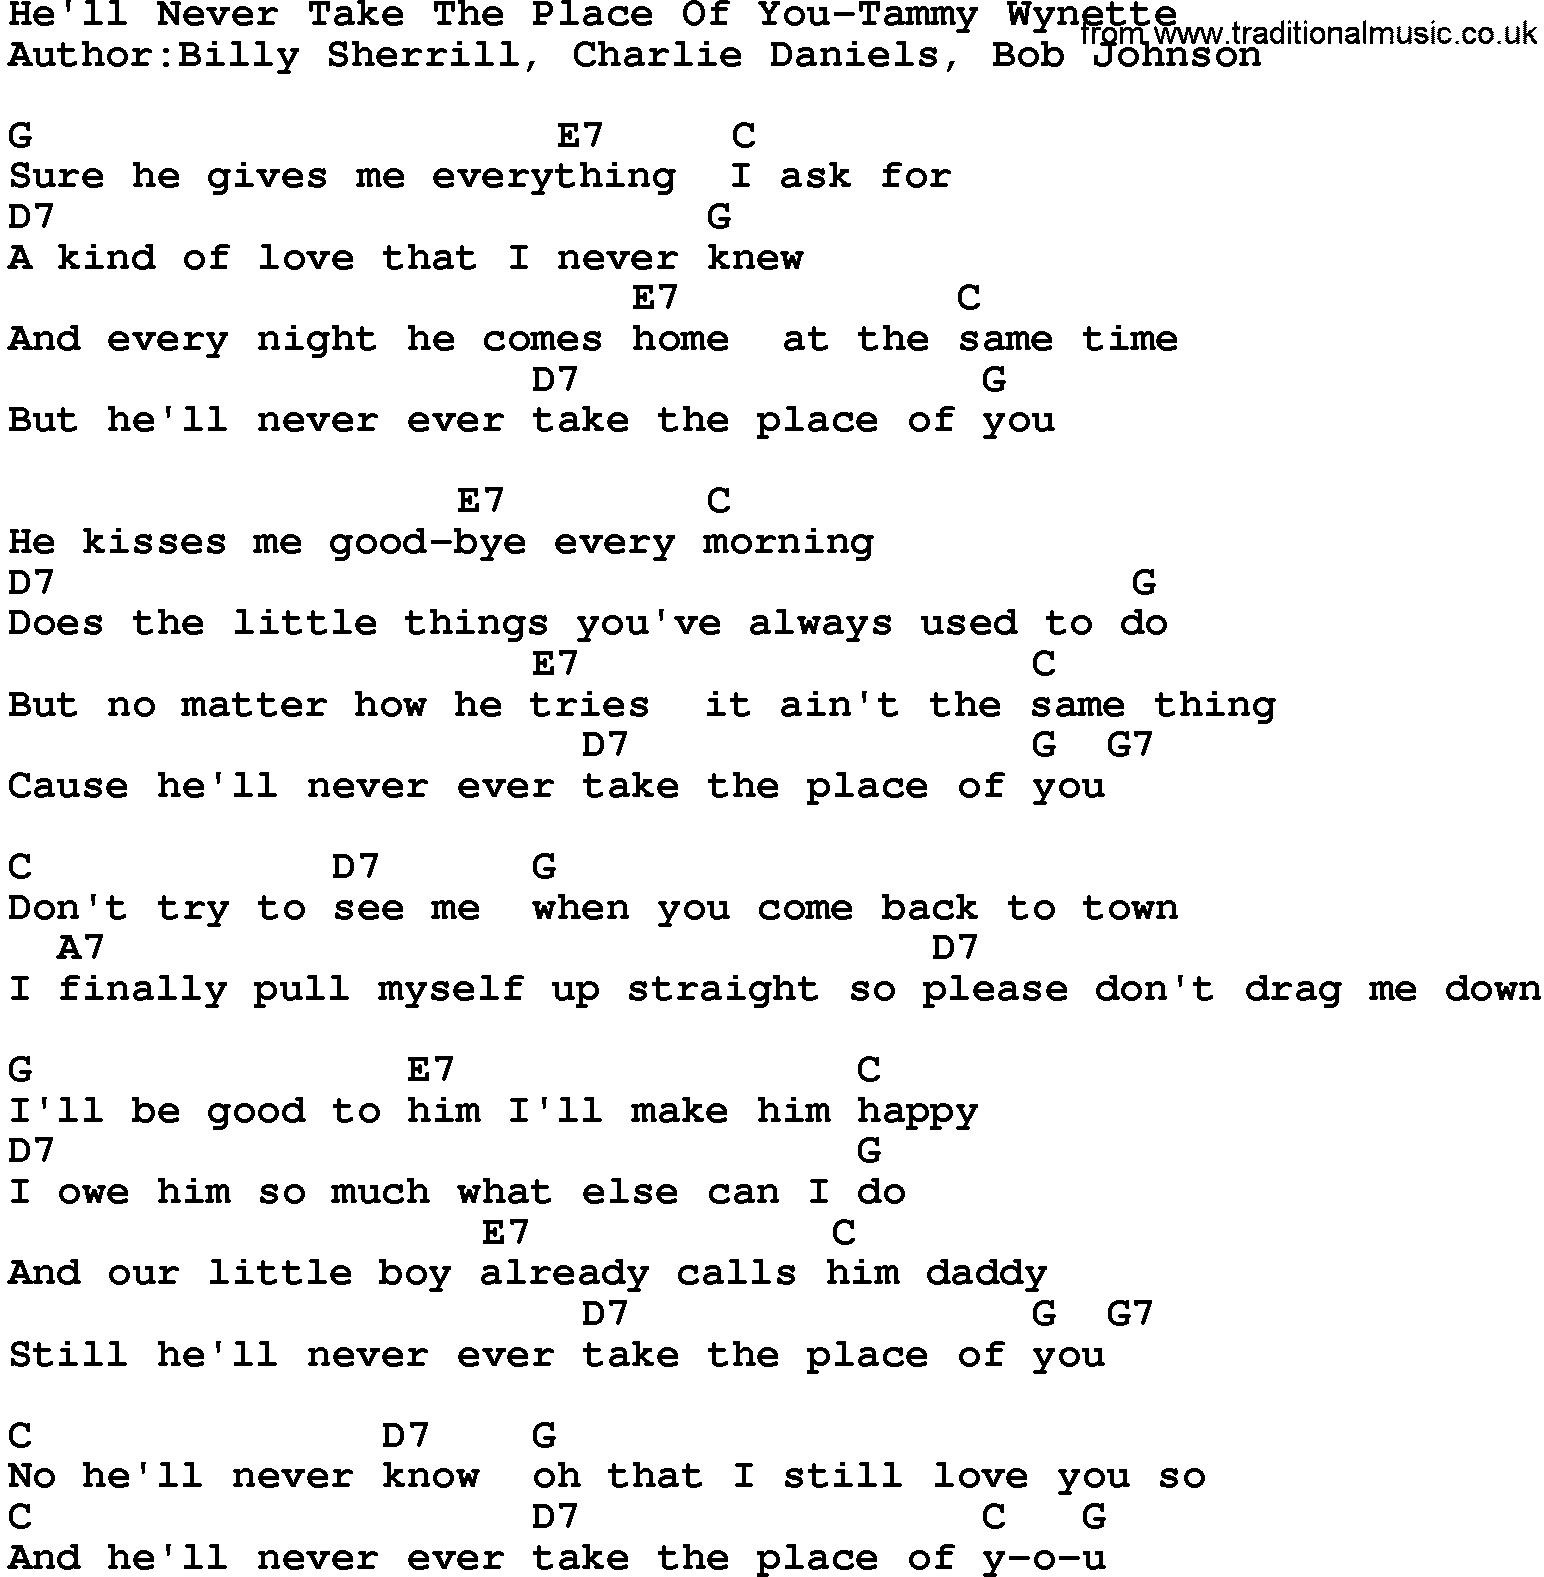 Country music song: He'll Never Take The Place Of You-Tammy Wynette lyrics and chords